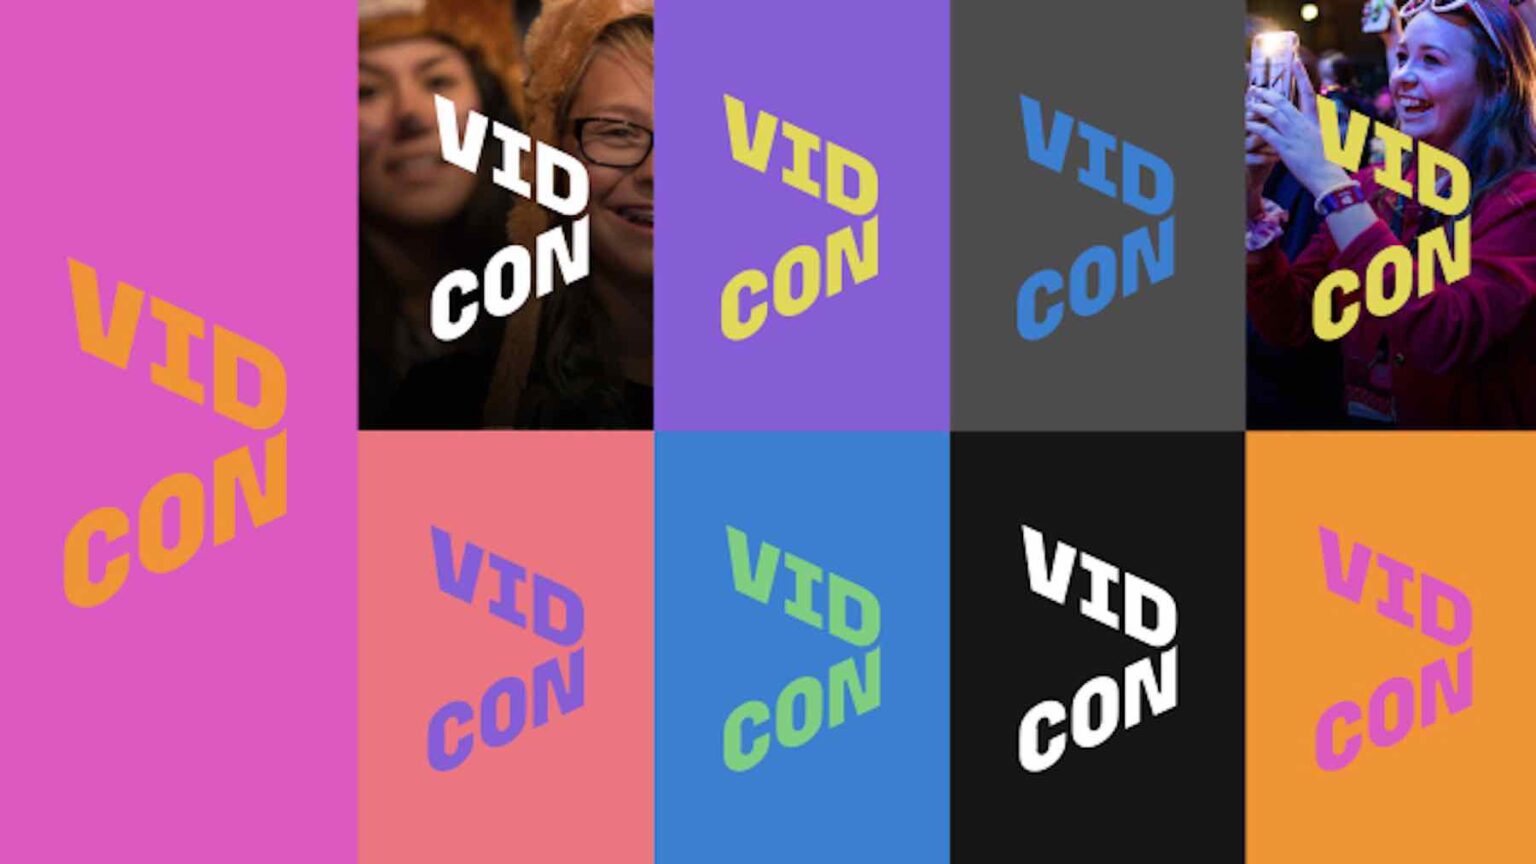 TikTok takes over VidCon 2021 as the lead sponsor for the events. What does this mean for YouTube? Learn everything about VidCon 2021.